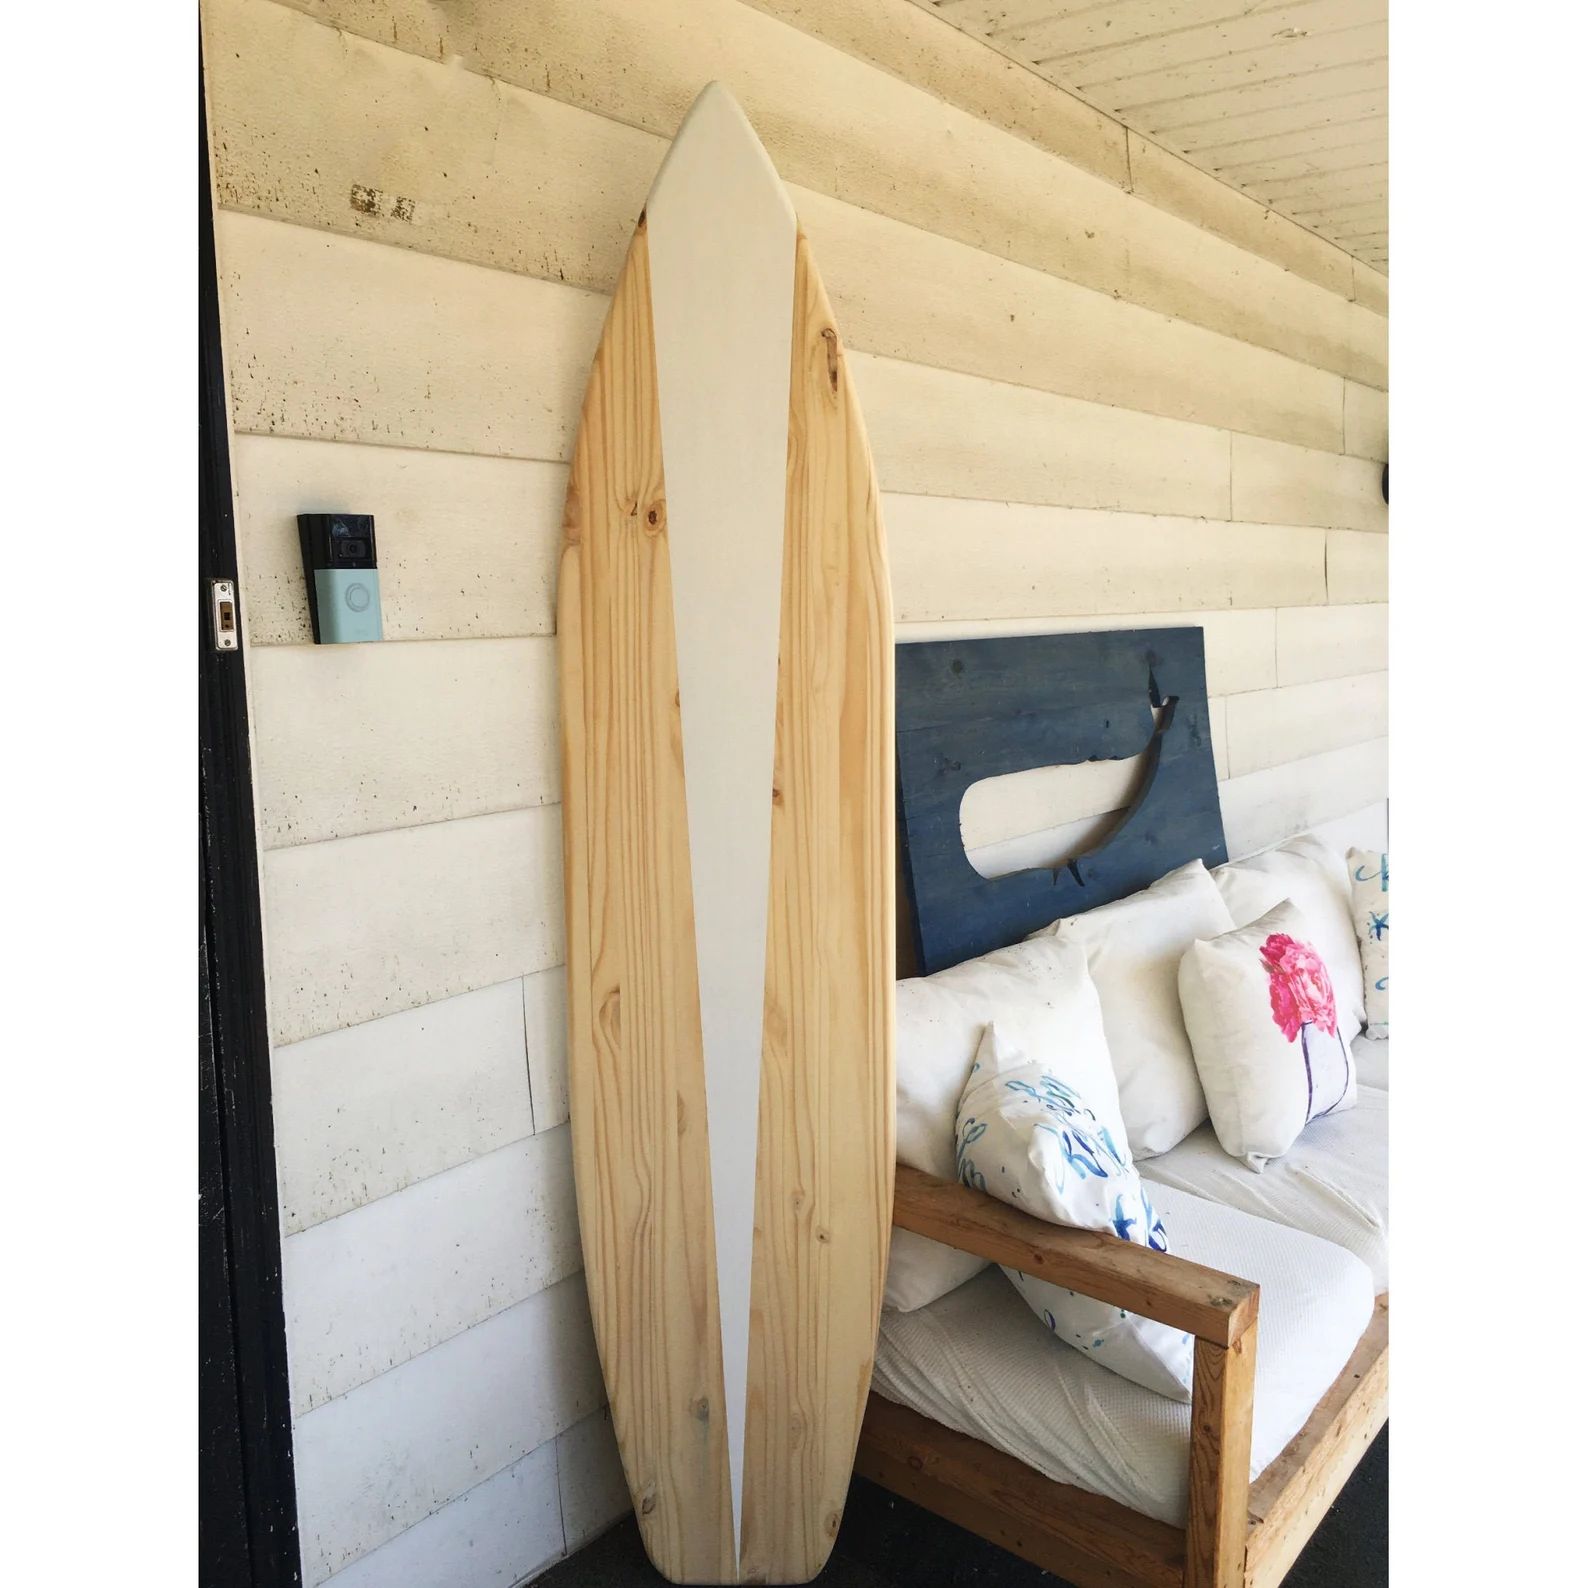 6 Foot Wood Surfboard Wall Art in a Natural Wood With White | Etsy | Etsy (US)